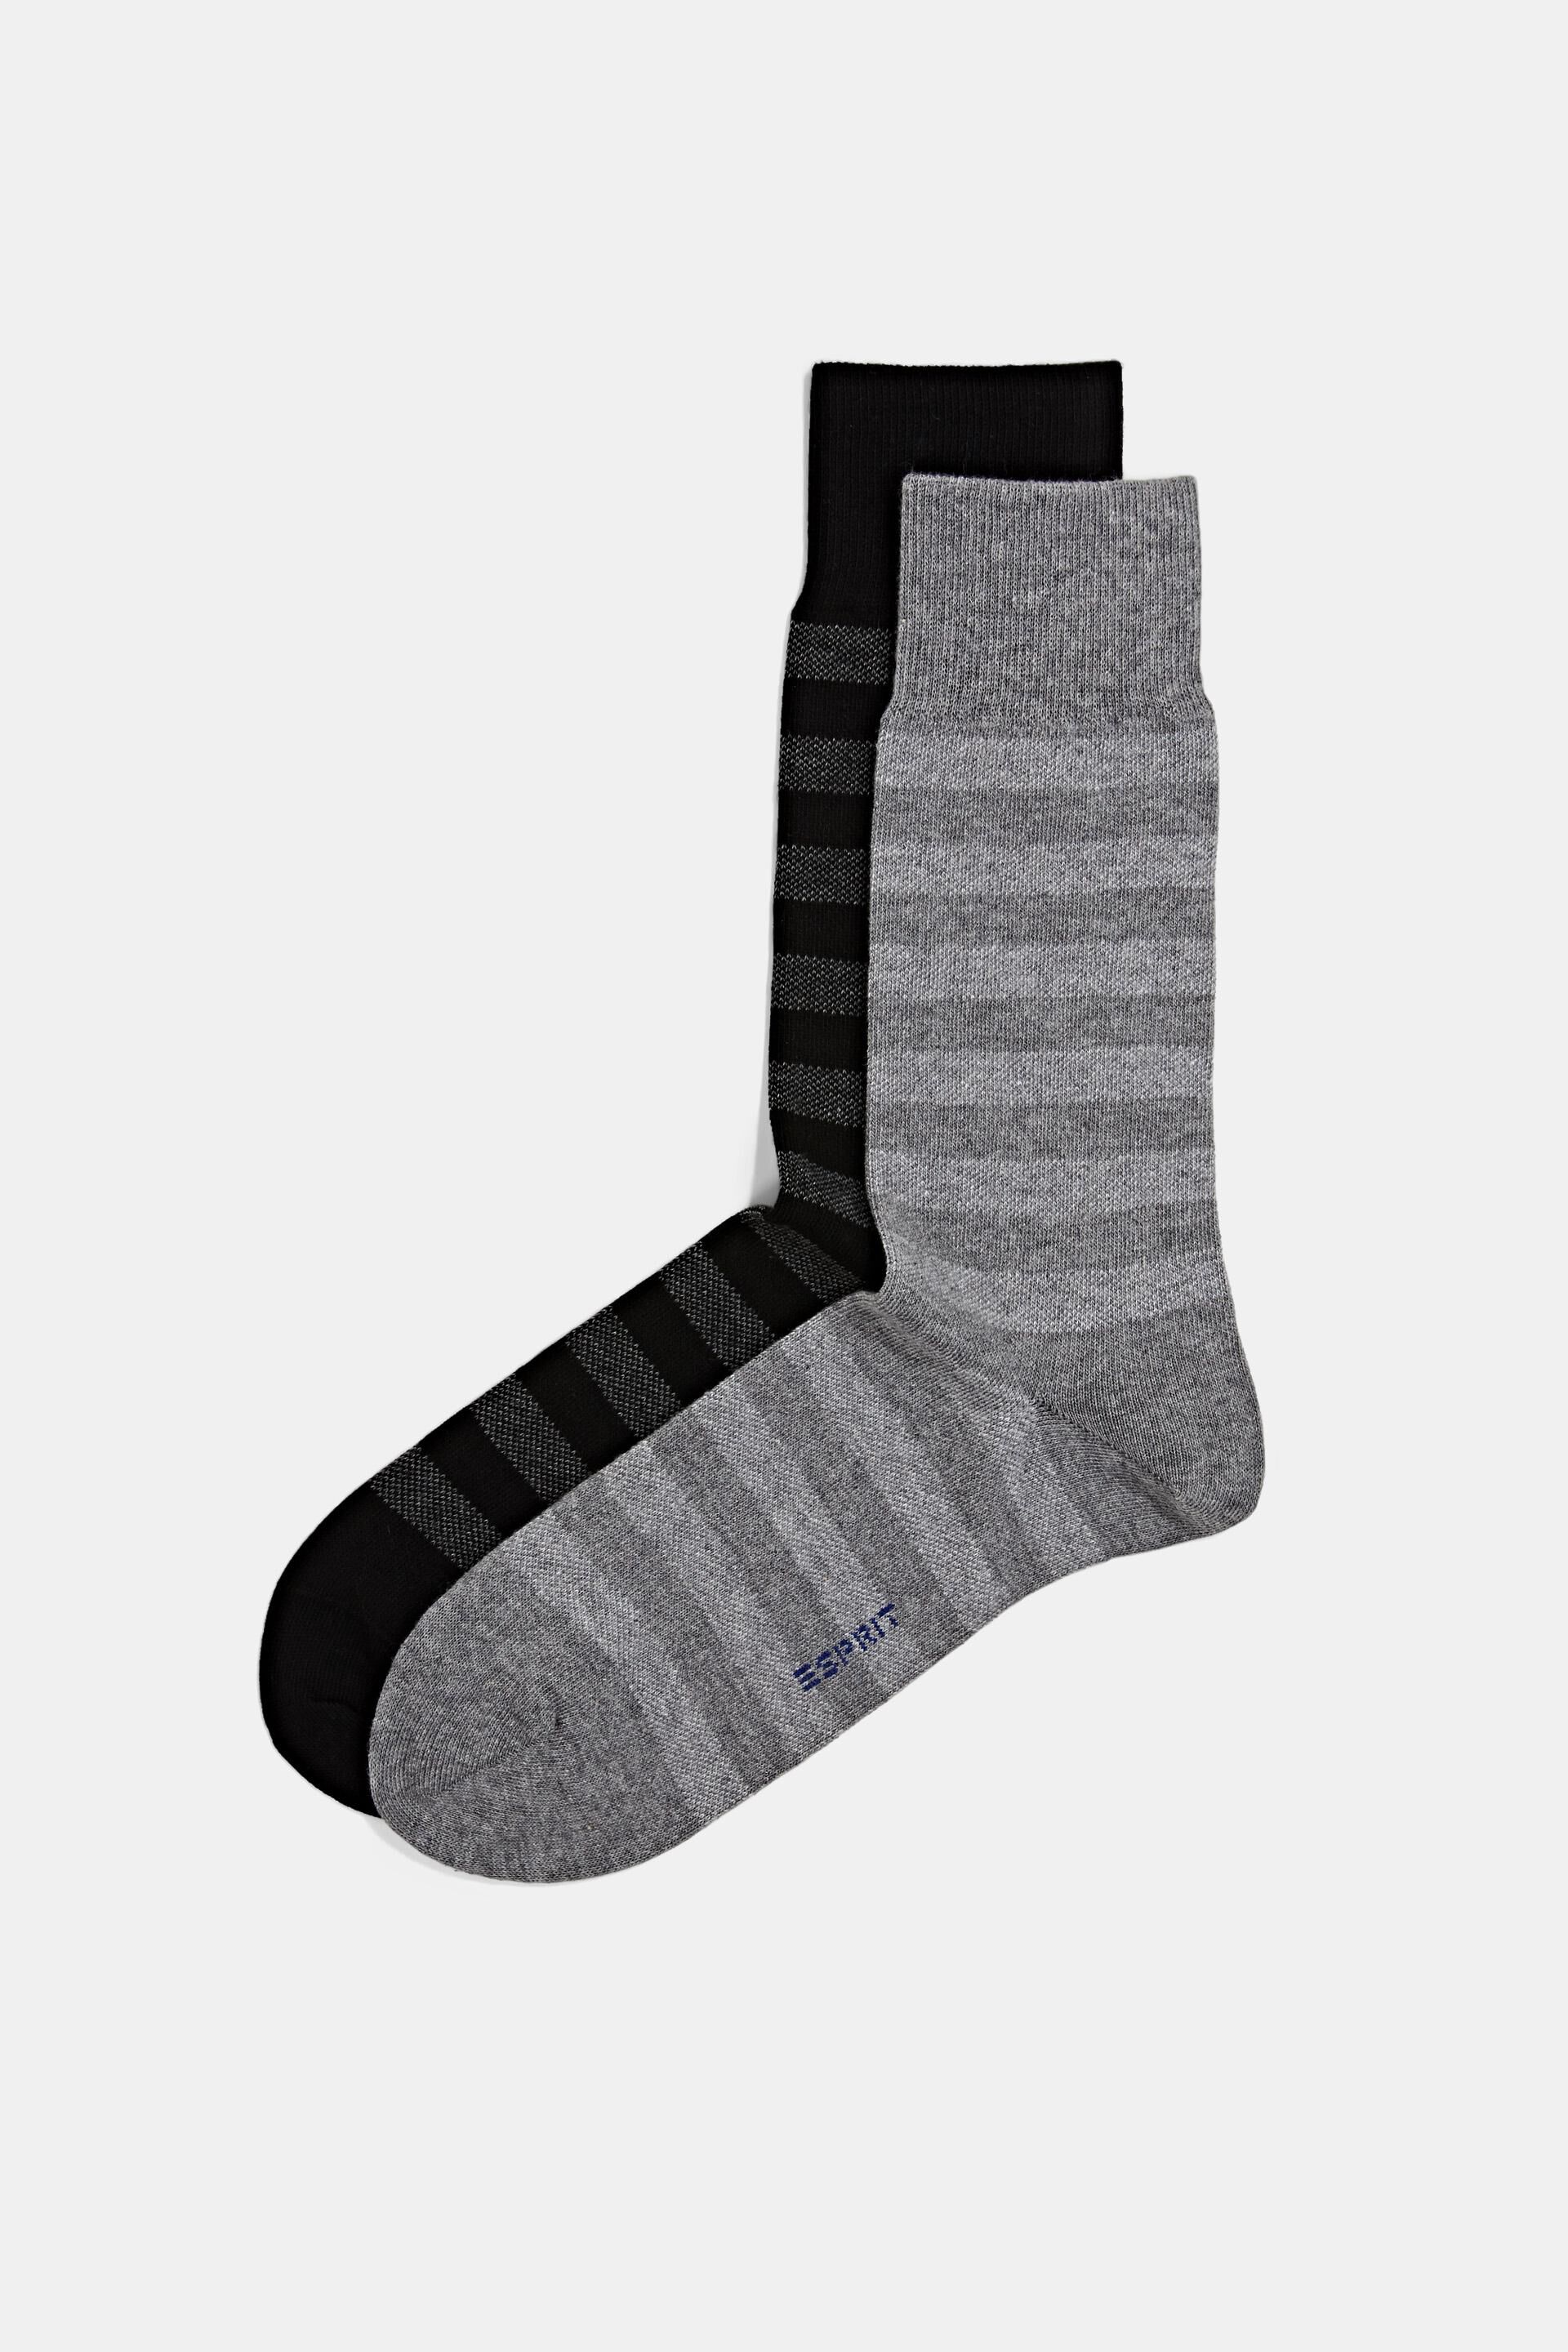 ESPRIT Unisex Kids Foot Logo 2-Pack Socks Cotton Black Grey More Colours Thin Colourful Calf Socks For Boys Or Girls Plain For Summer Or Winter Ideal For School Multipack 2 Pairs